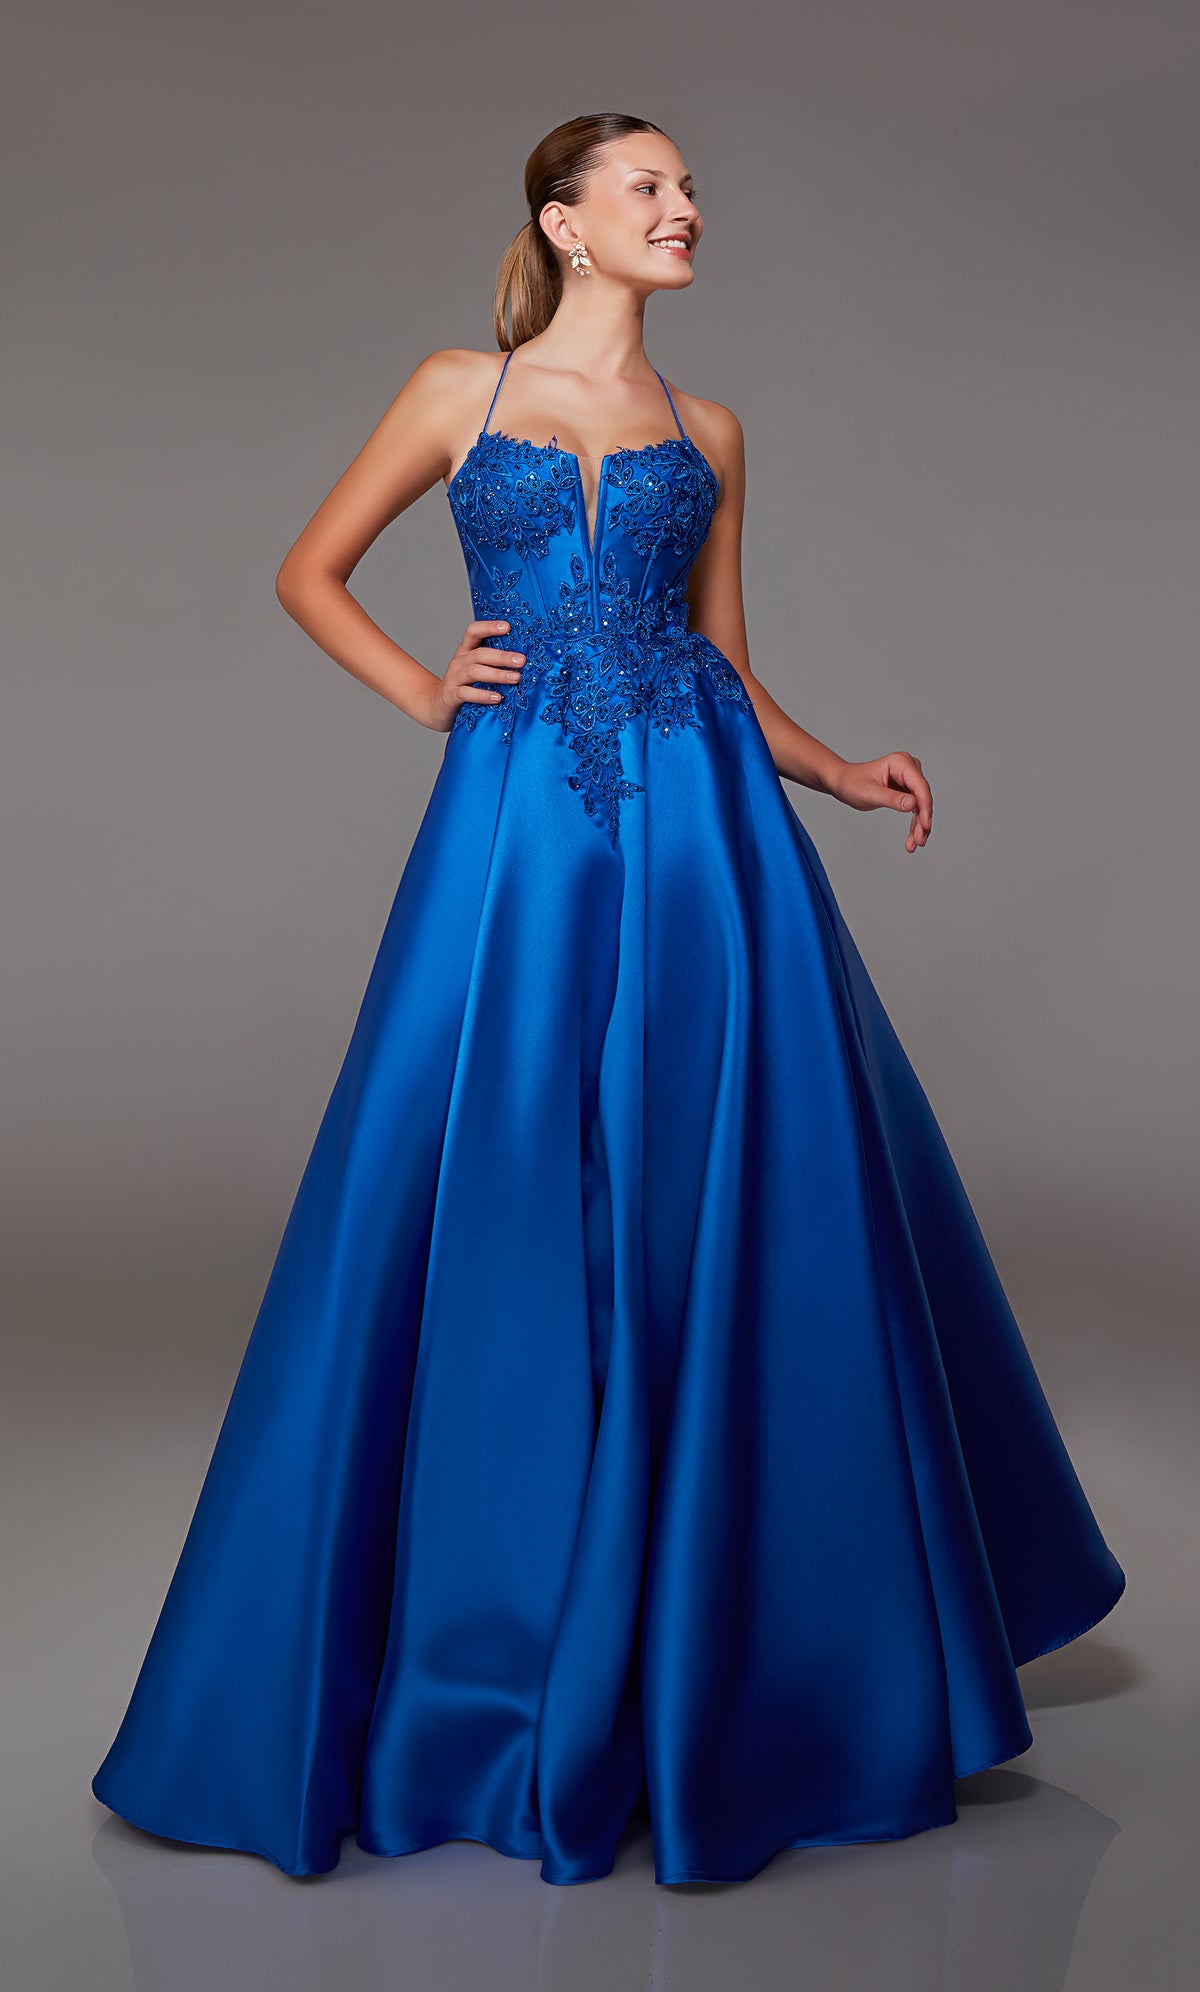 Royal blue ball gown spotlighting an plunging corset bodice with beaded floral lace appliques and an strappy lace-up back for an enchanting and stylish look.